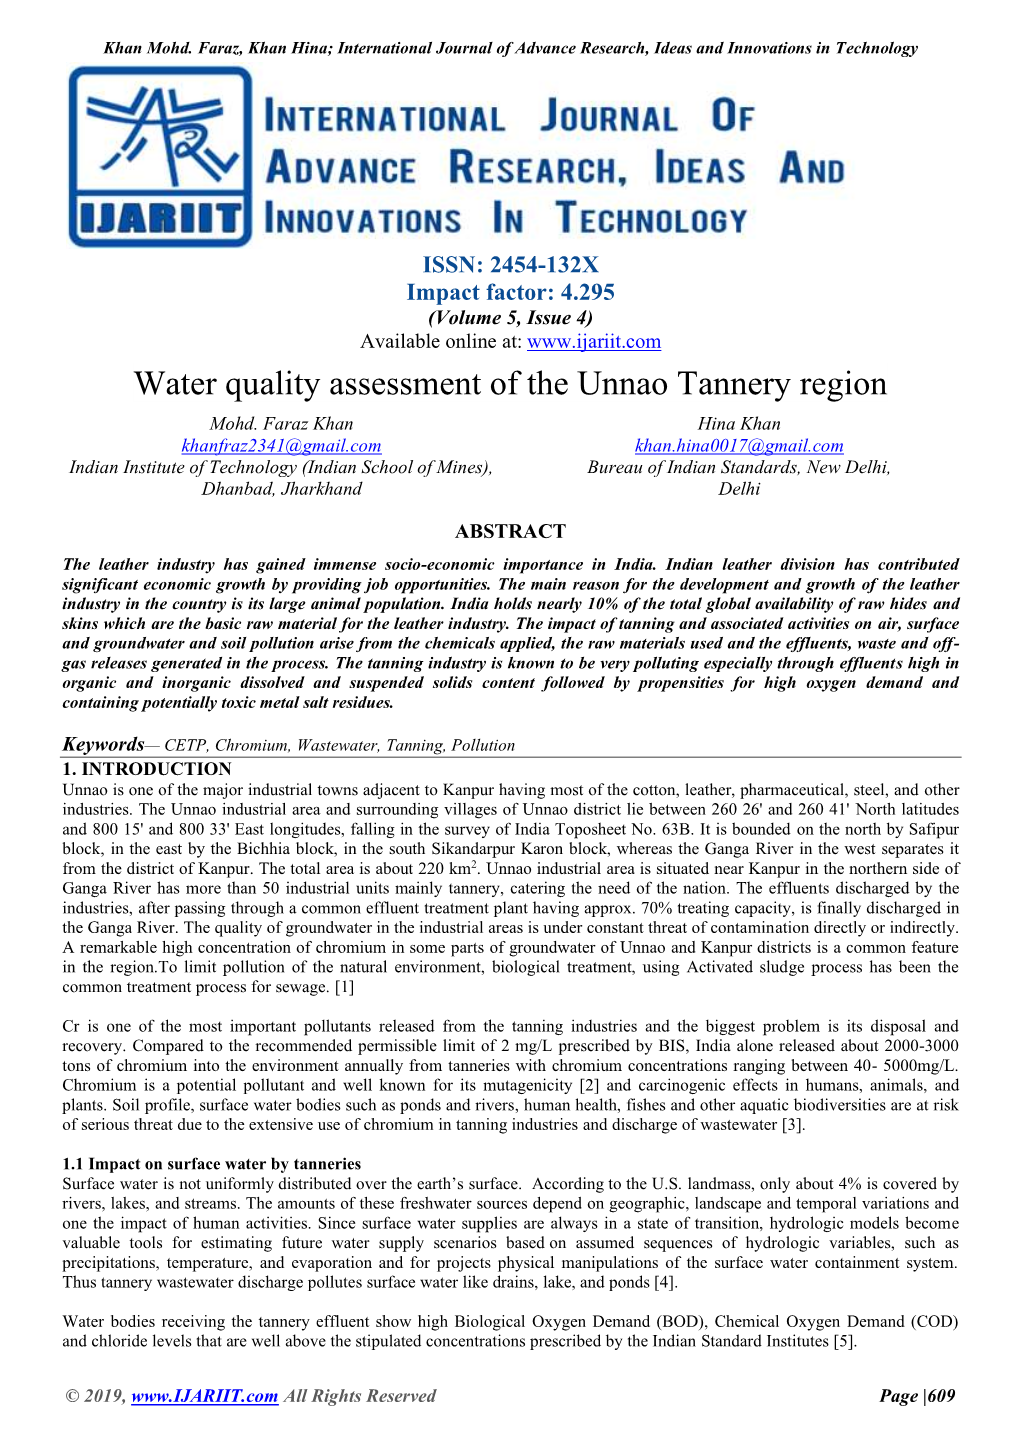 Water Quality Assessment of the Unnao Tannery Region Mohd